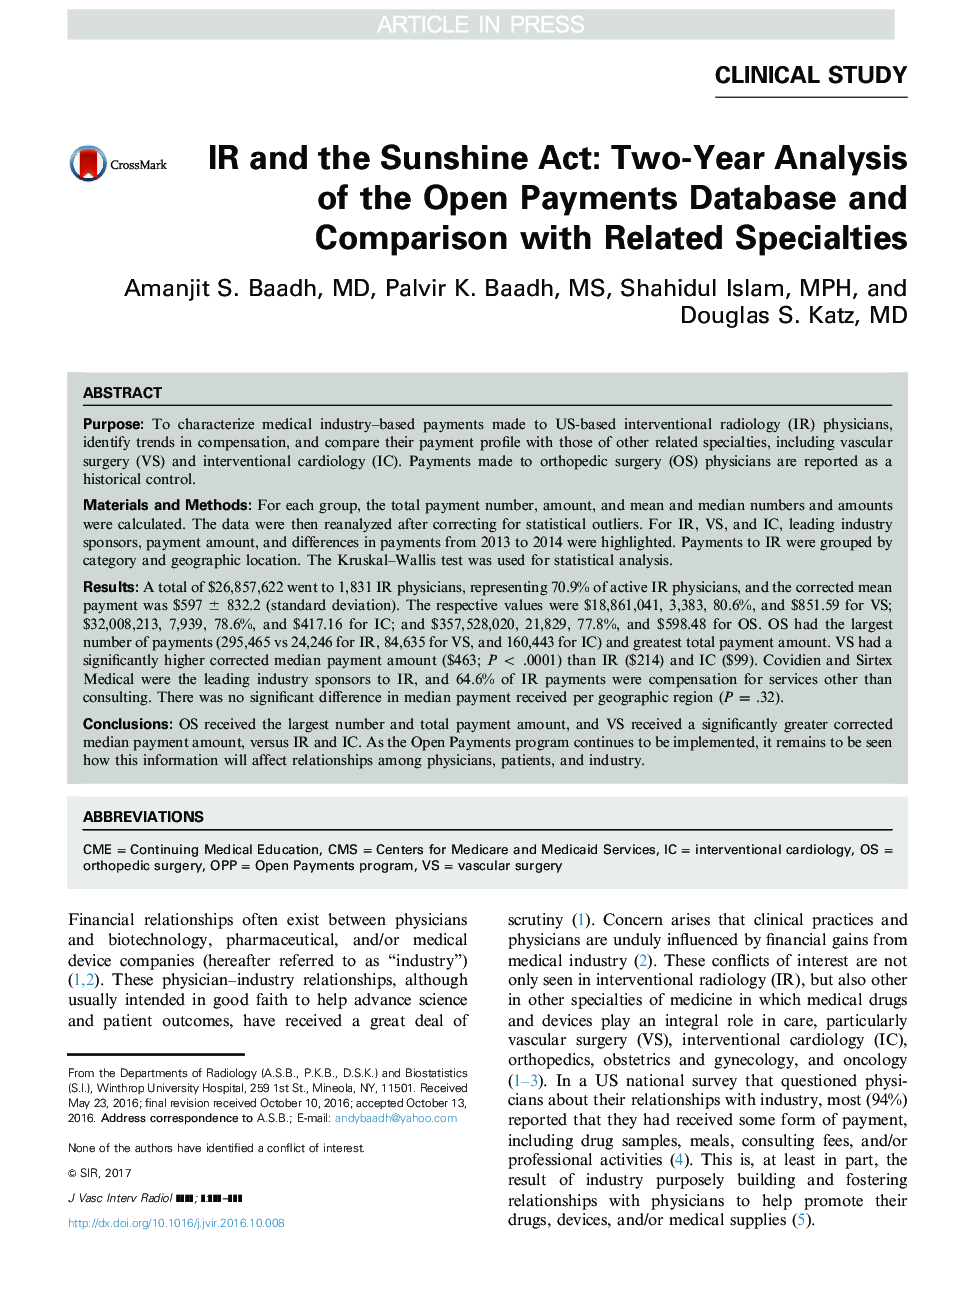 IR and the Sunshine Act: Two-Year Analysis of the Open Payments Database and Comparison with Related Specialties